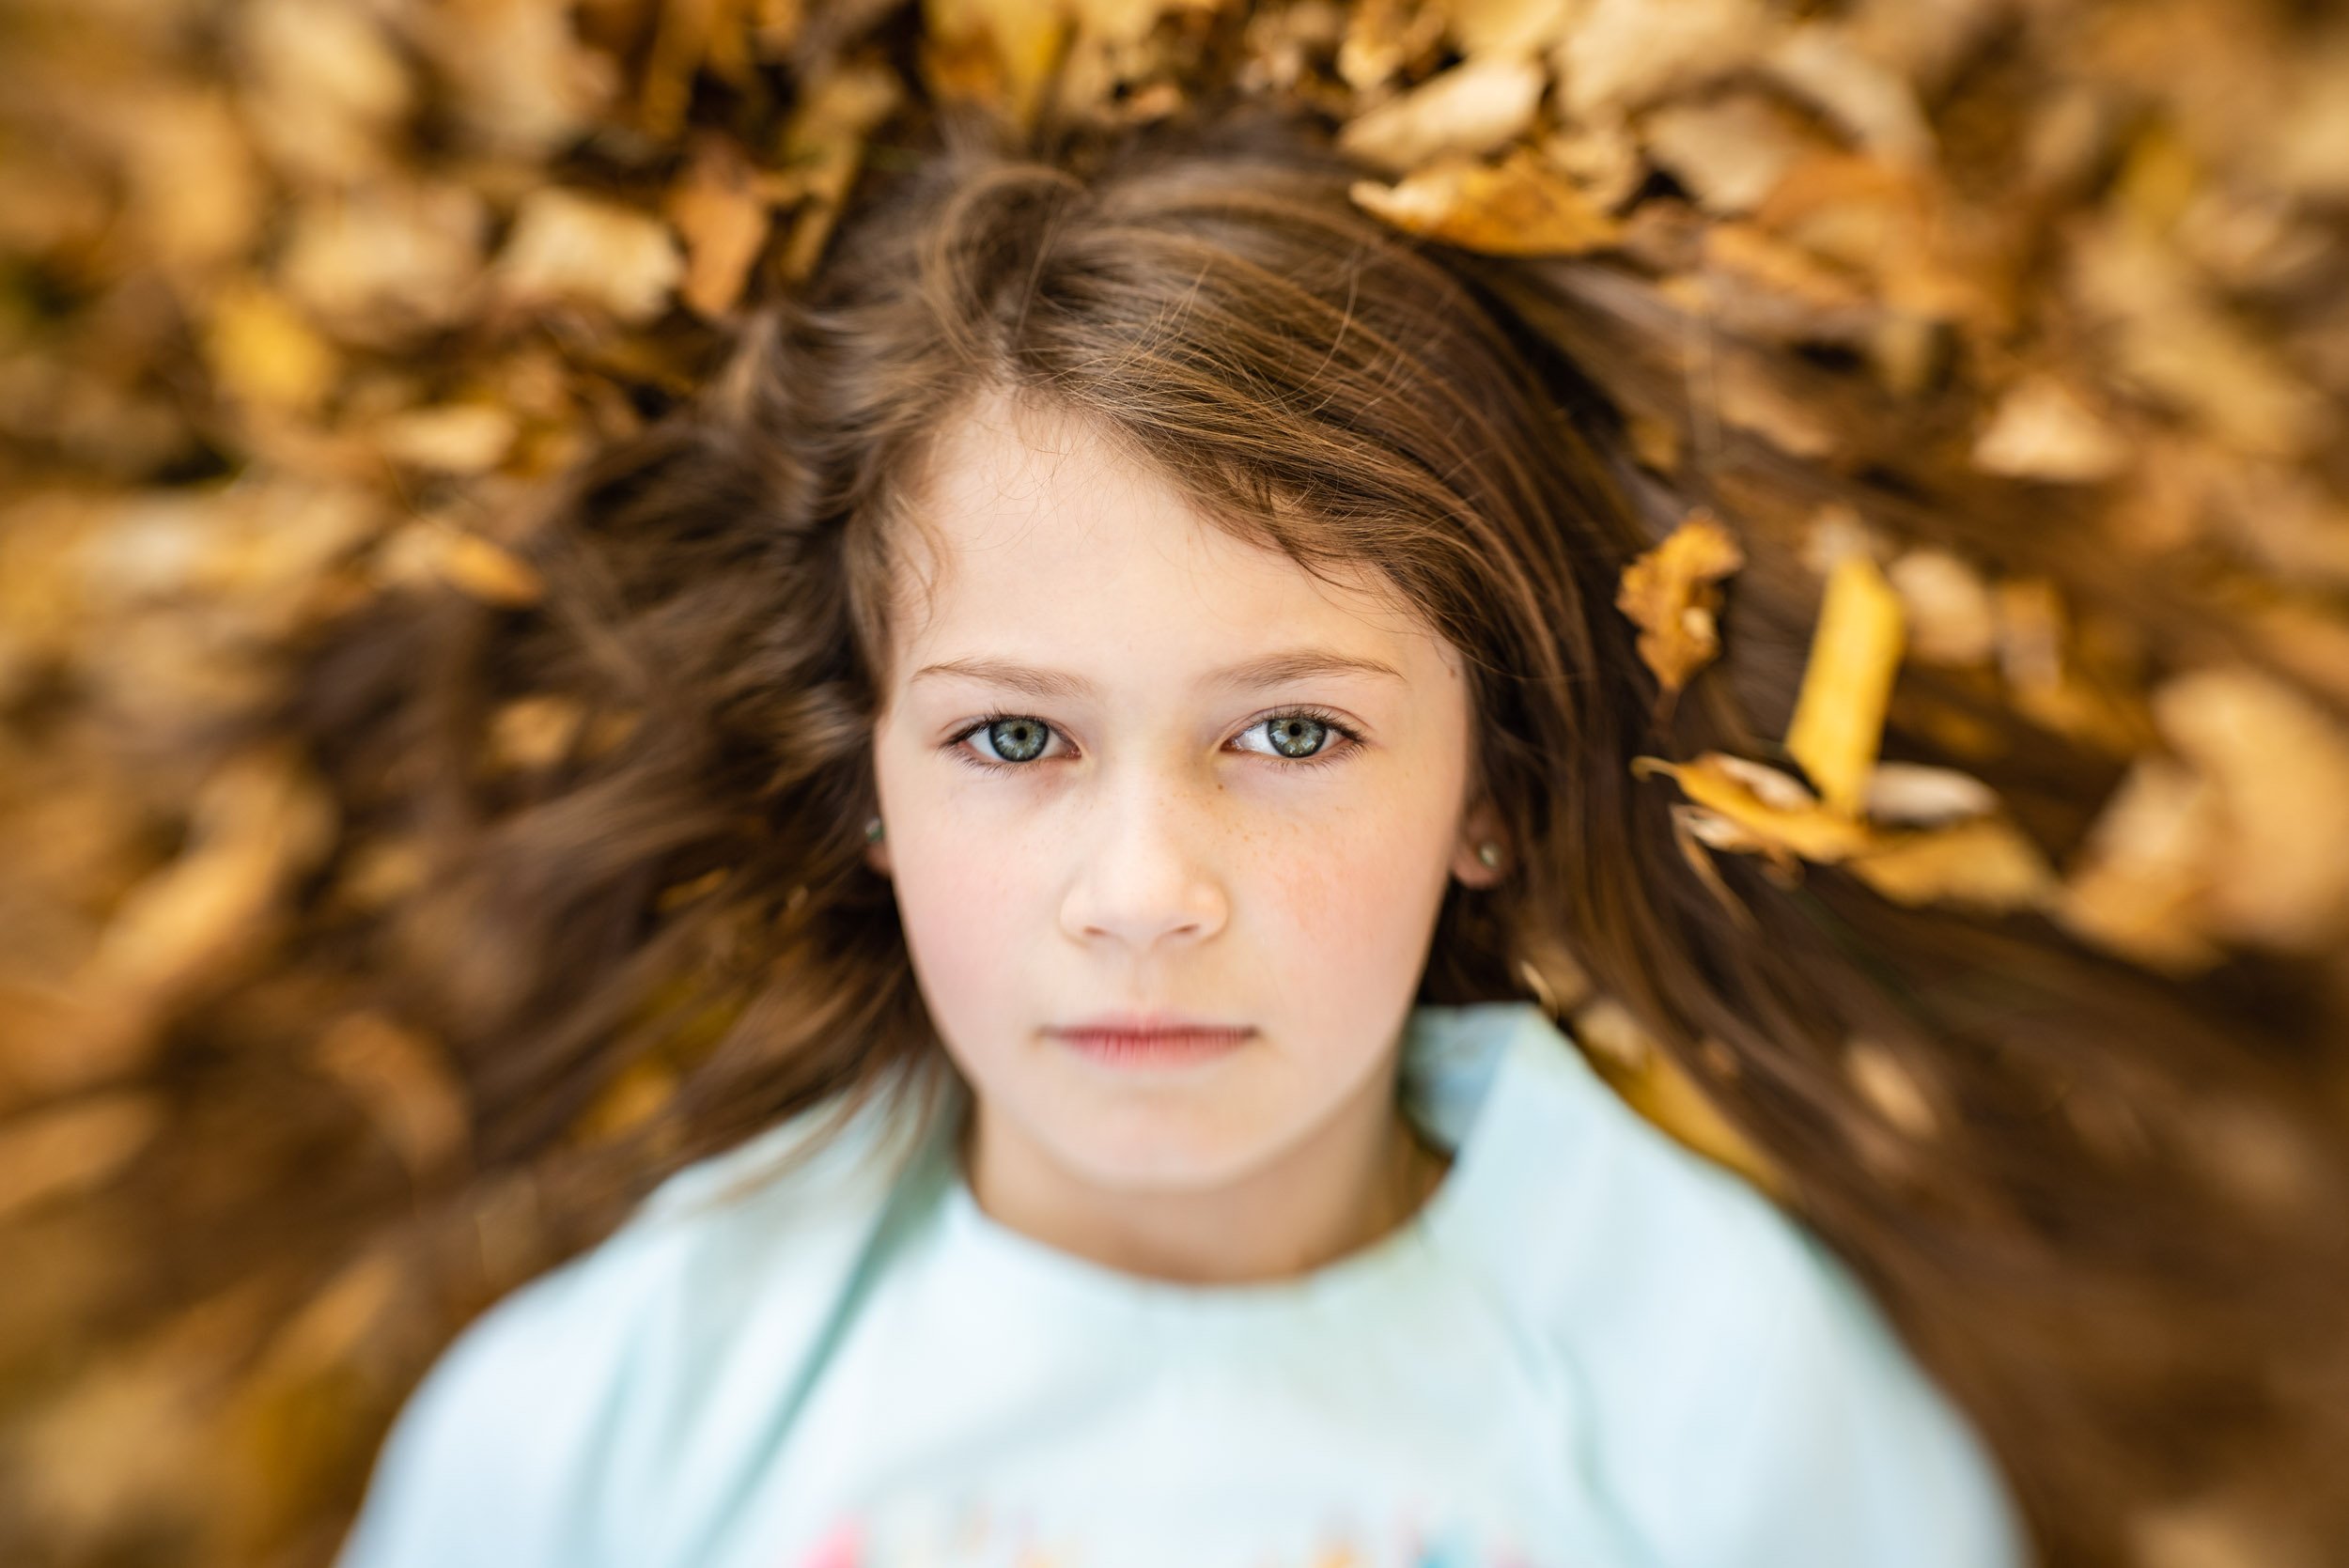 girl-in-blue-shirt-lays-in-pile-of-leaves-in-the-fall.jpg